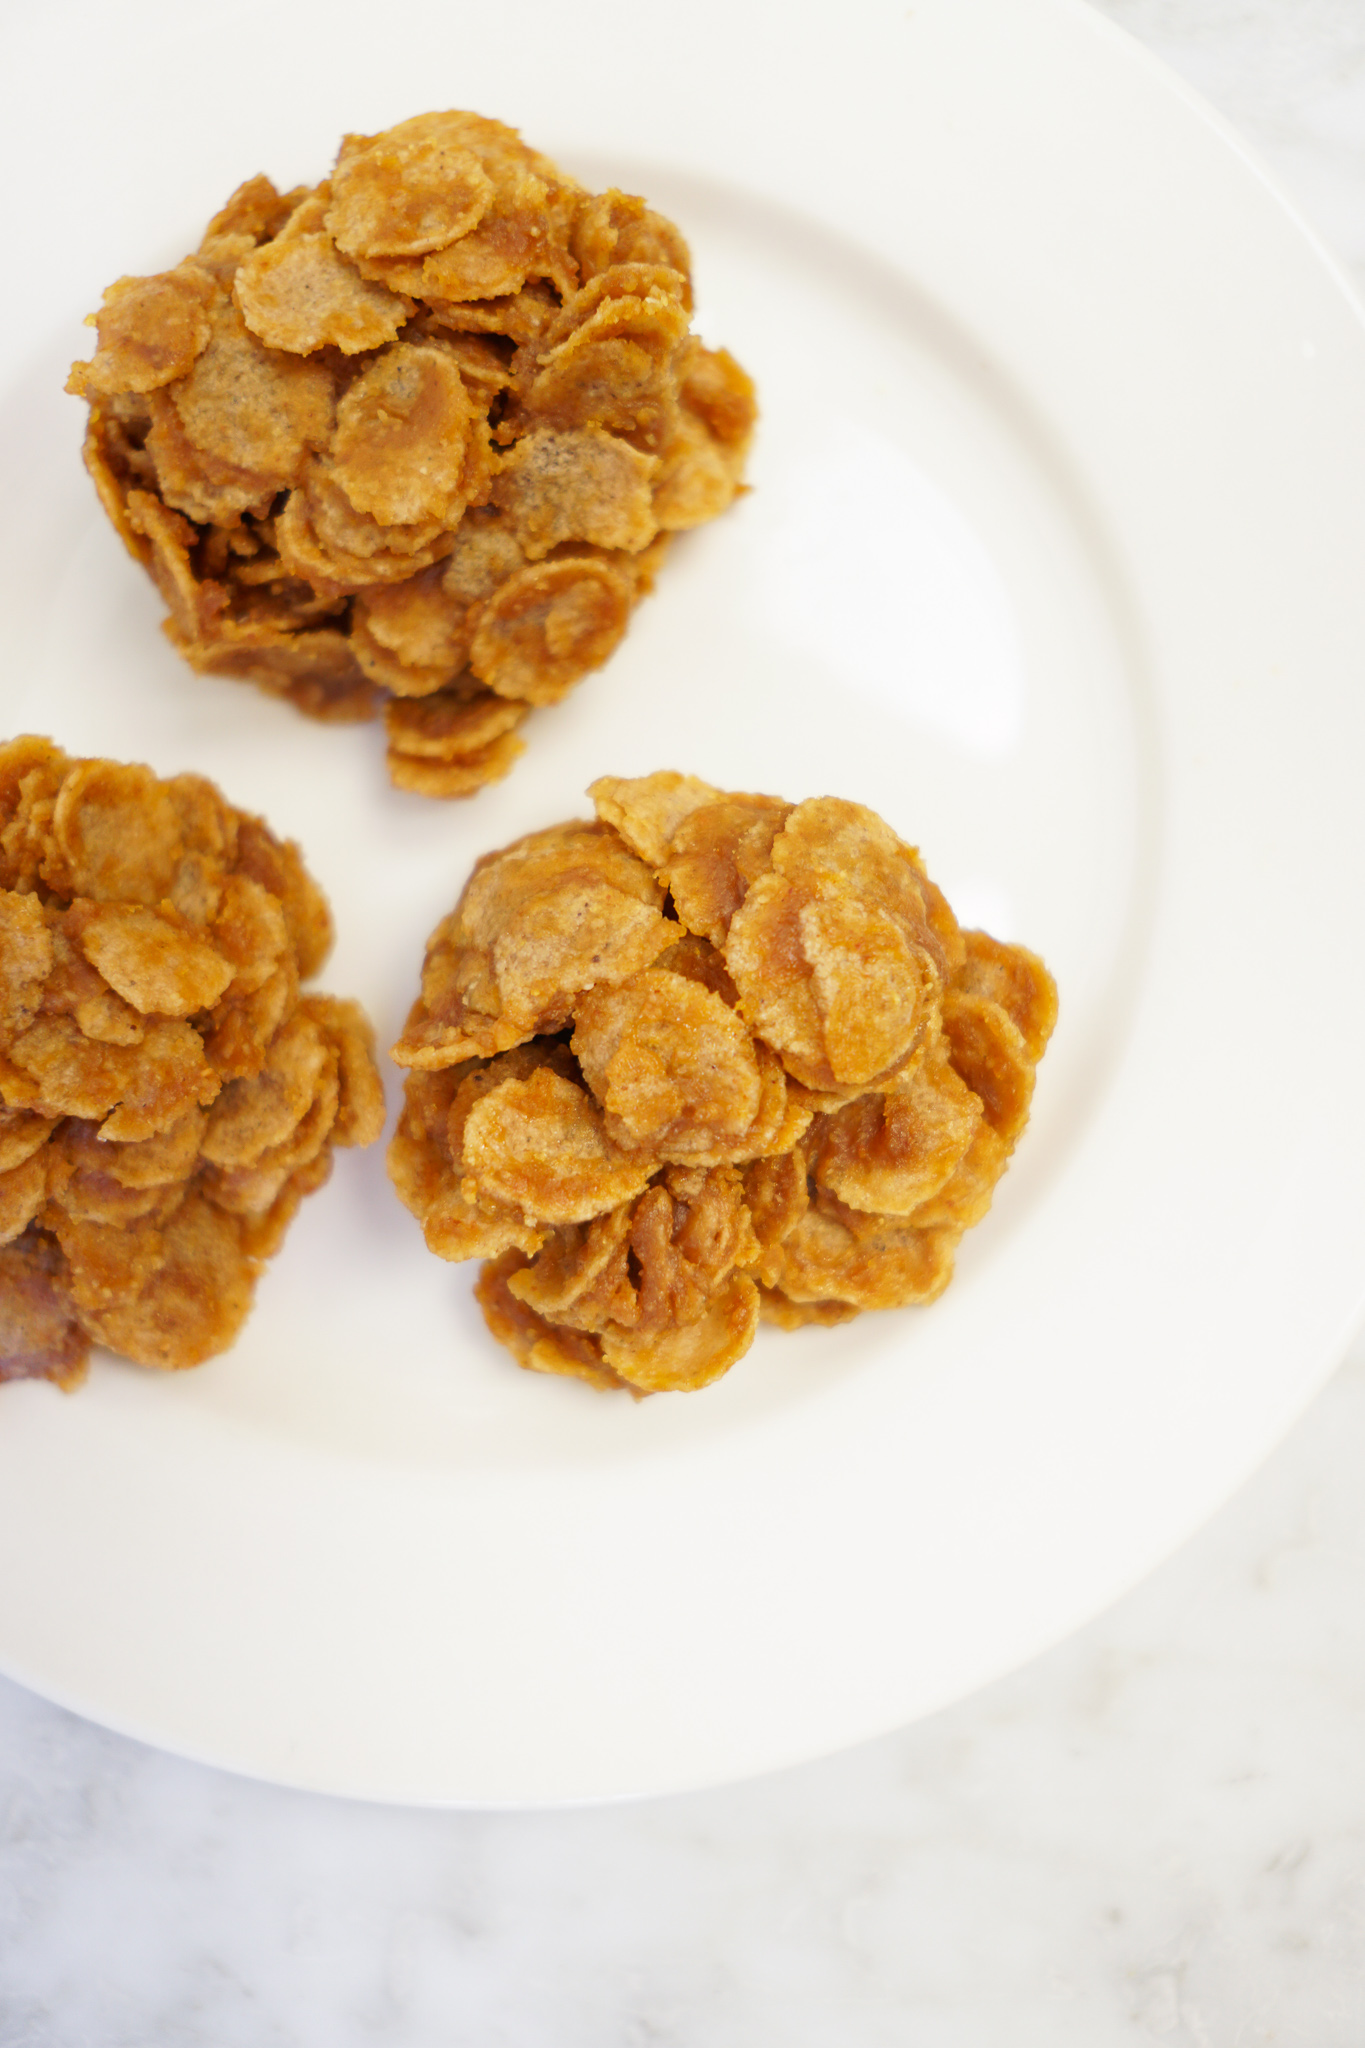 Frosted Corn Flake Cereal Clusters Recipe